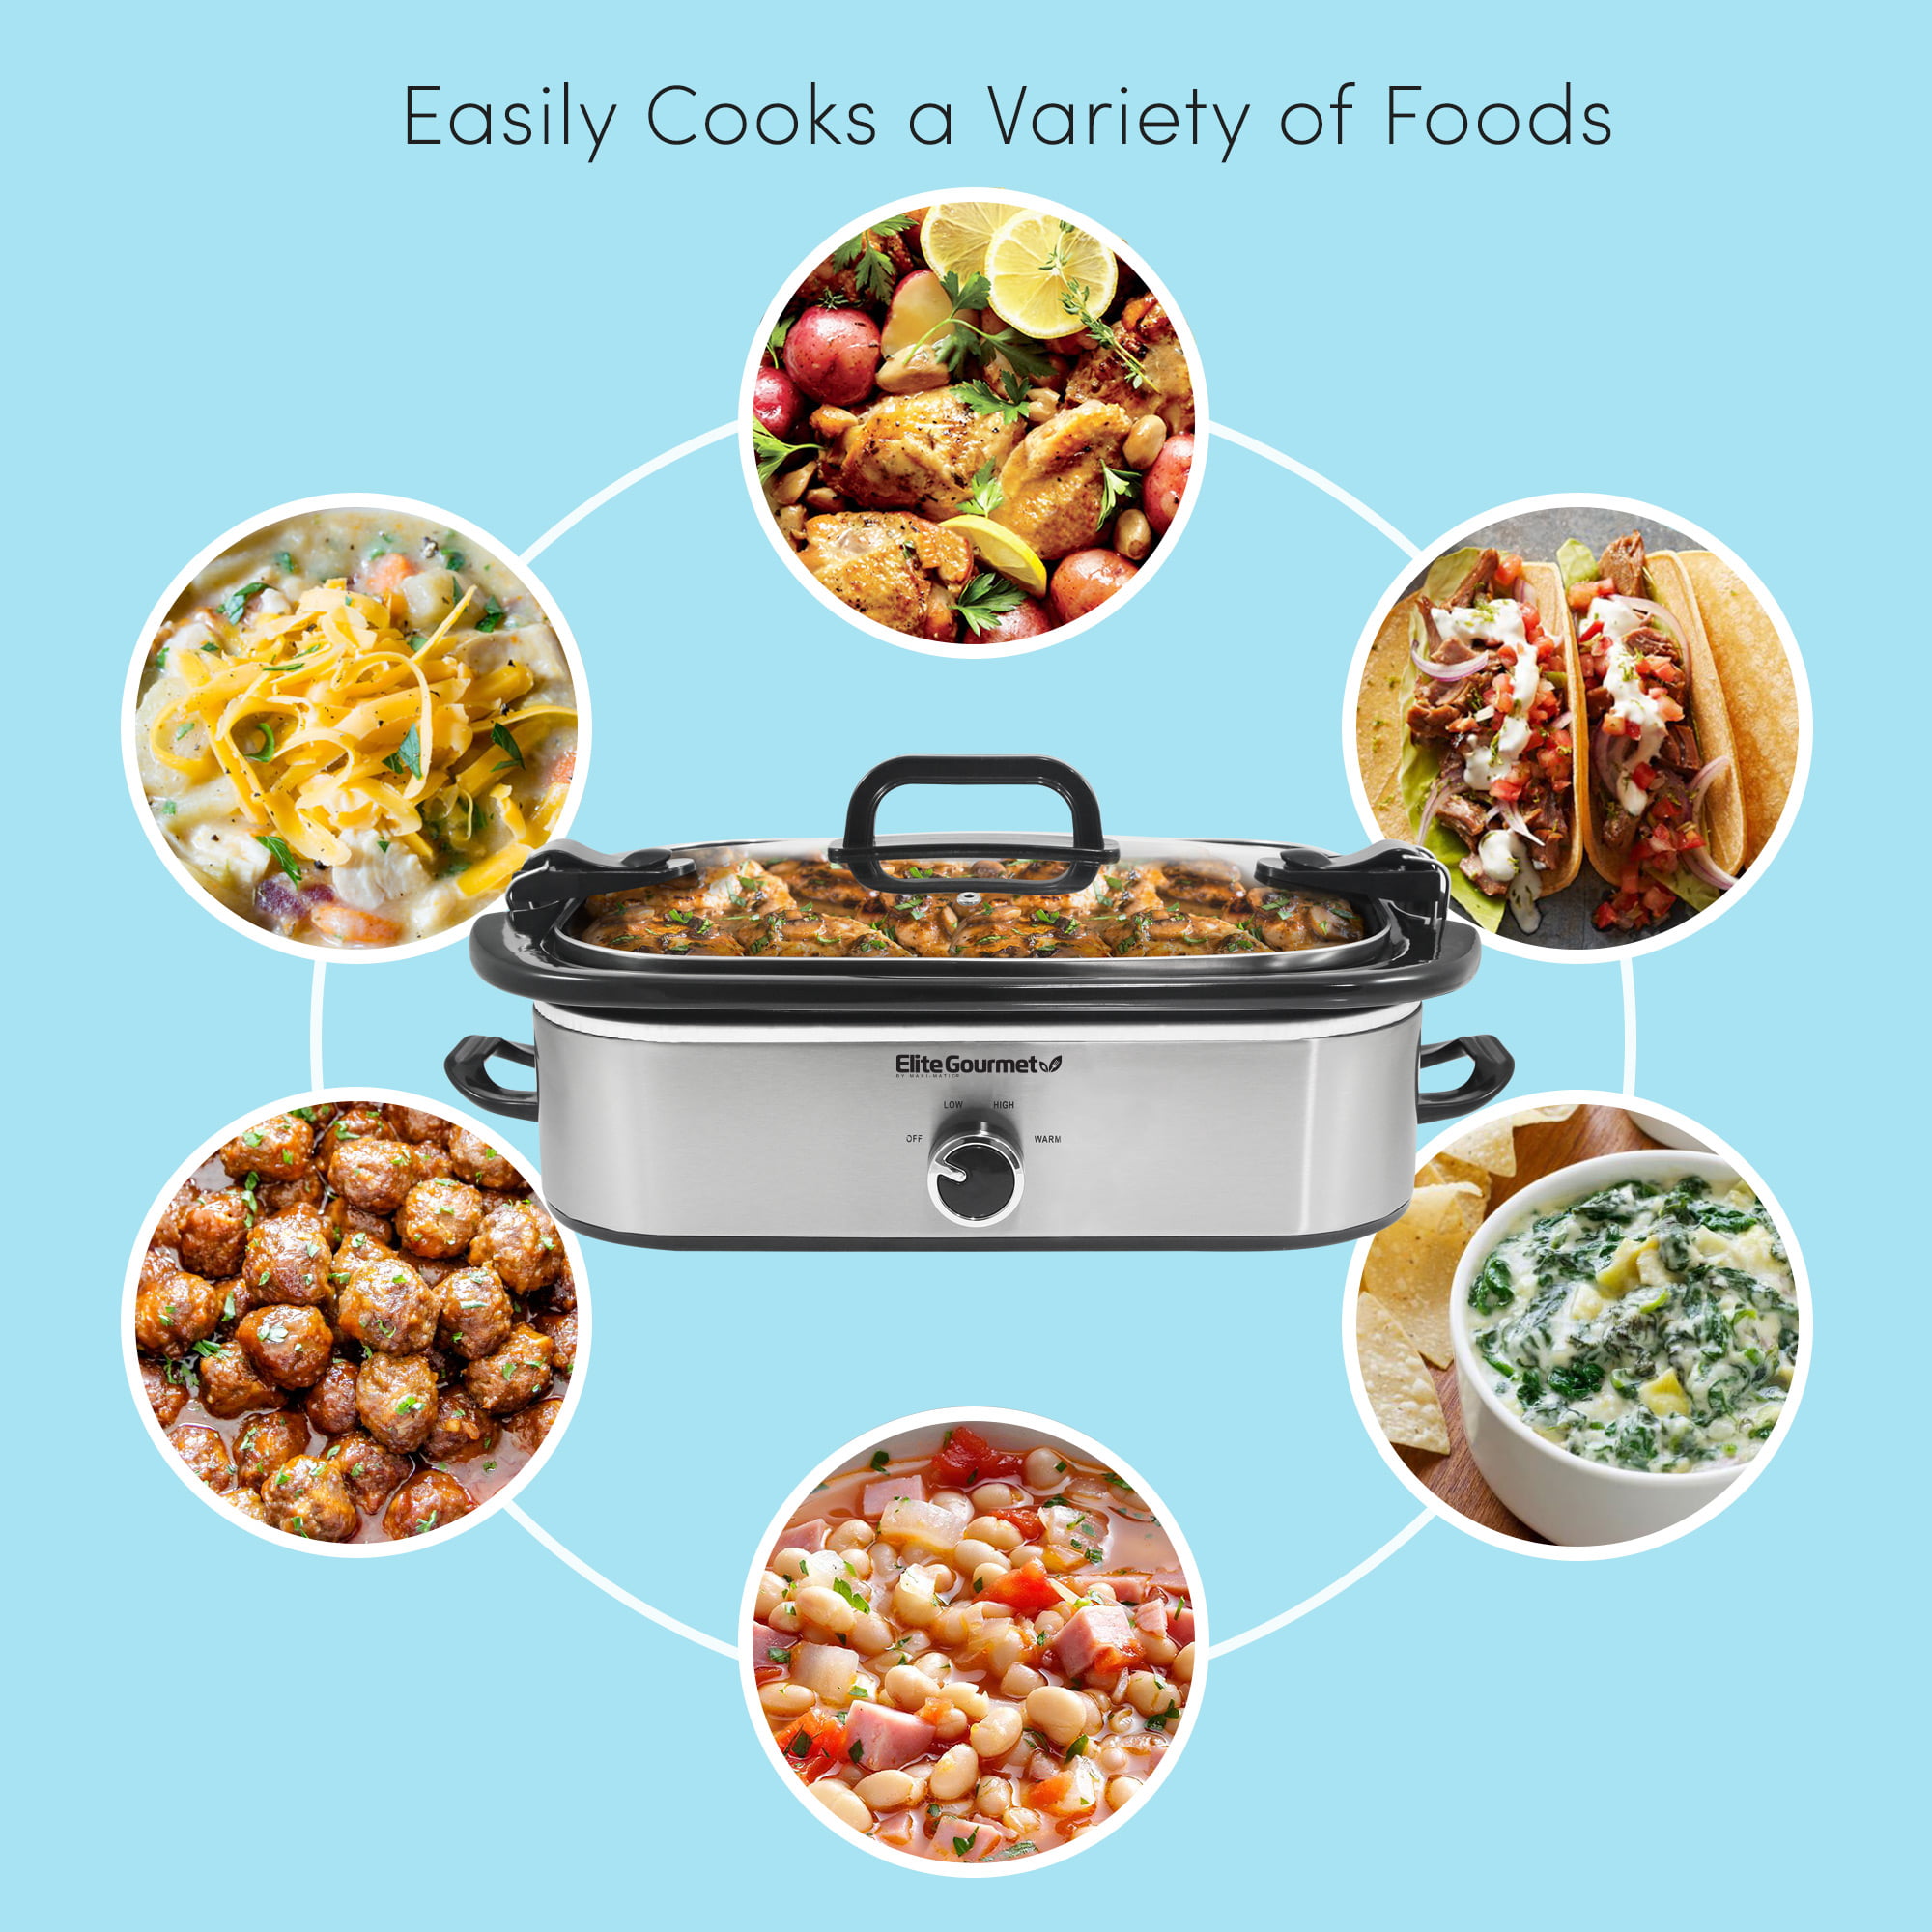 Elite Gourmet Casserole Slow Cooker with Locking Lid - Red, 3.5 qt -  Dillons Food Stores